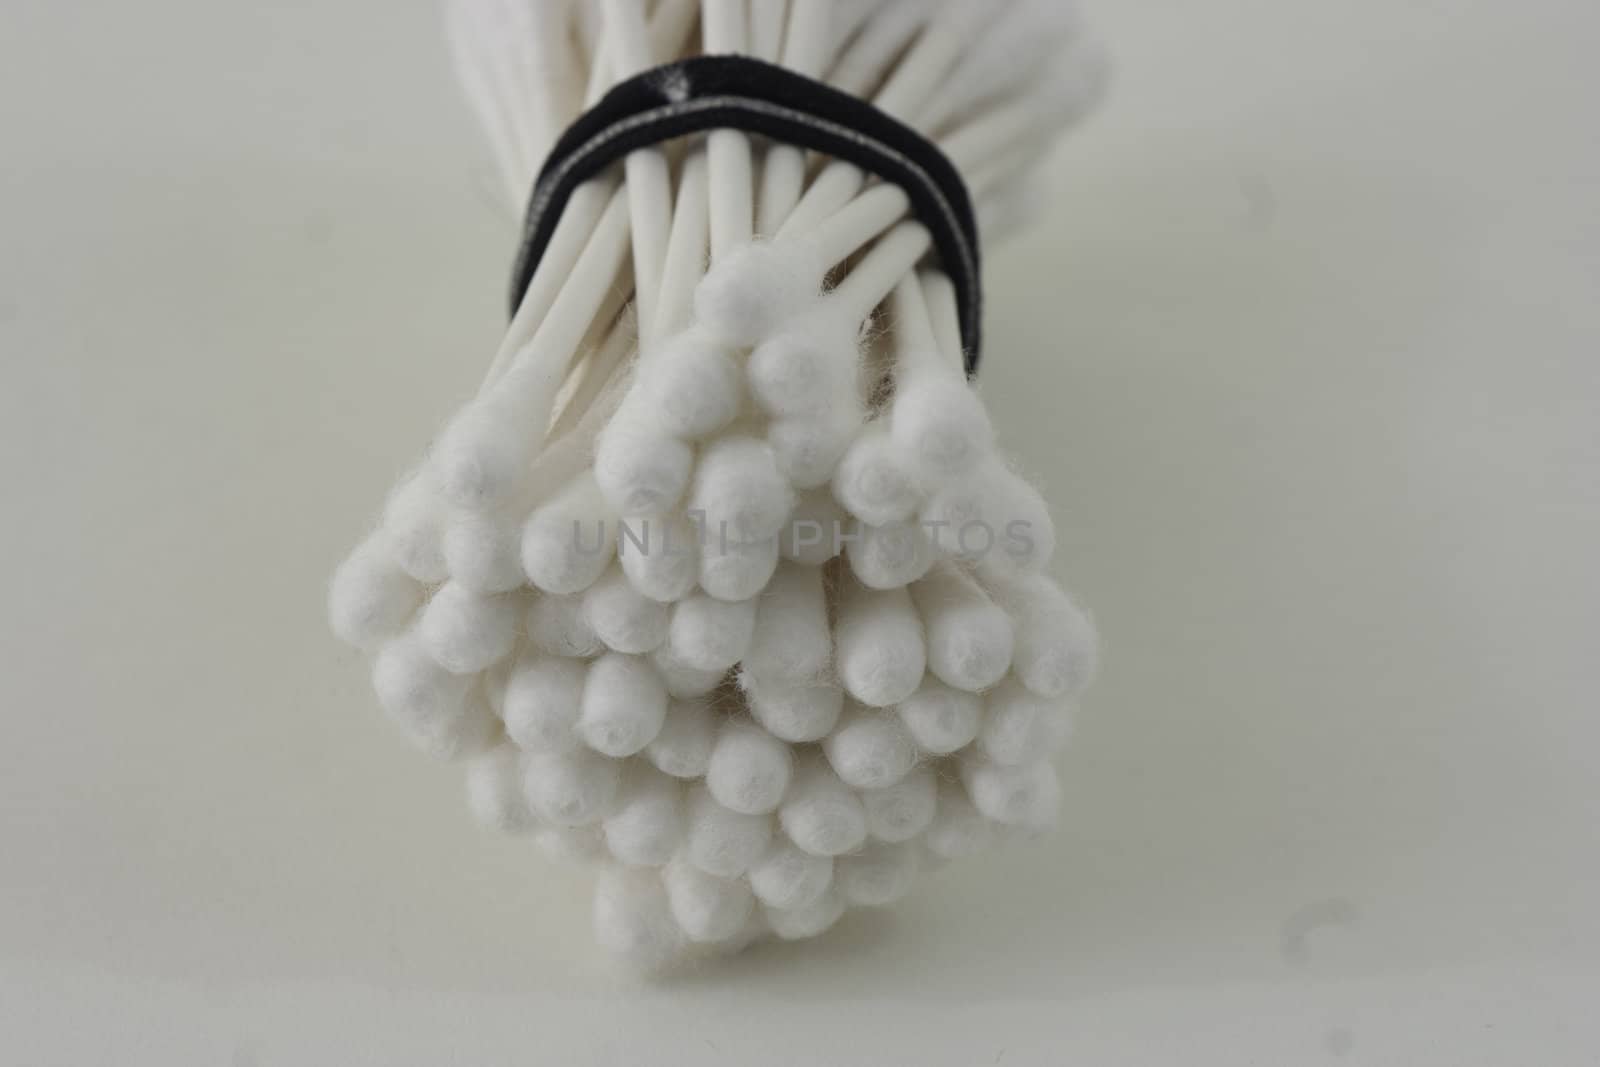 Bundles of cotton swabs by rothphotosc